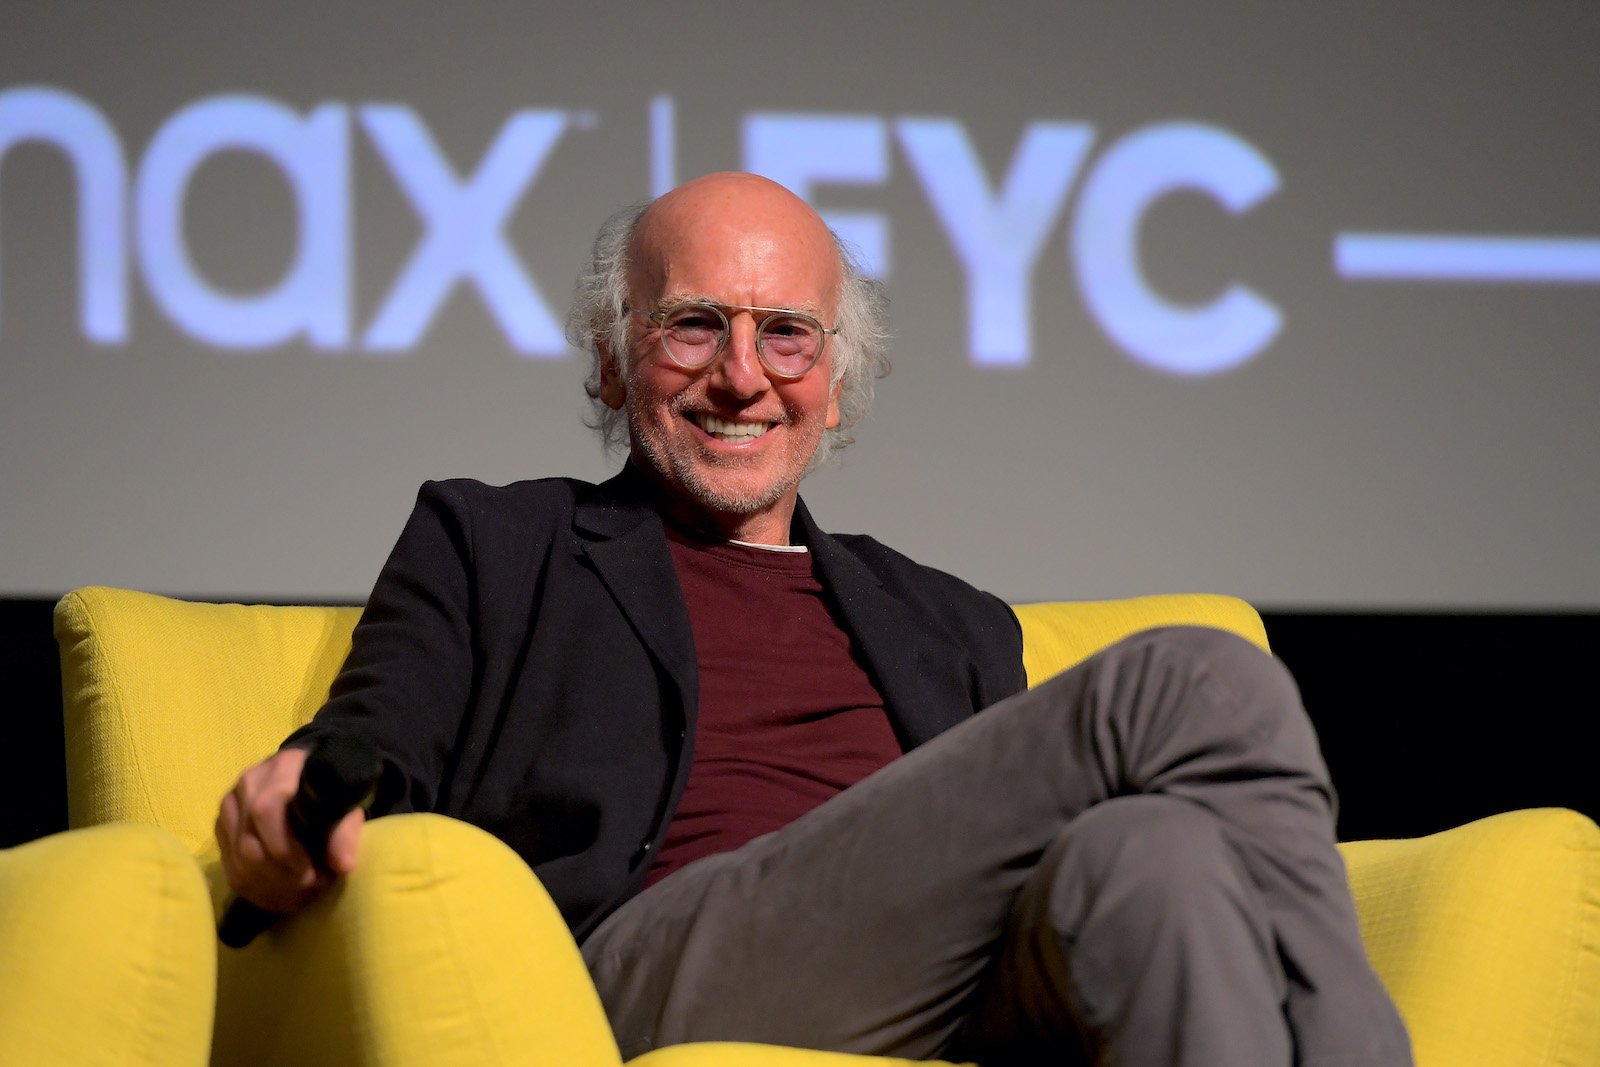 Larry David smiles for a photo onstage during the Curb Your Enthusiasm FYC Panel 